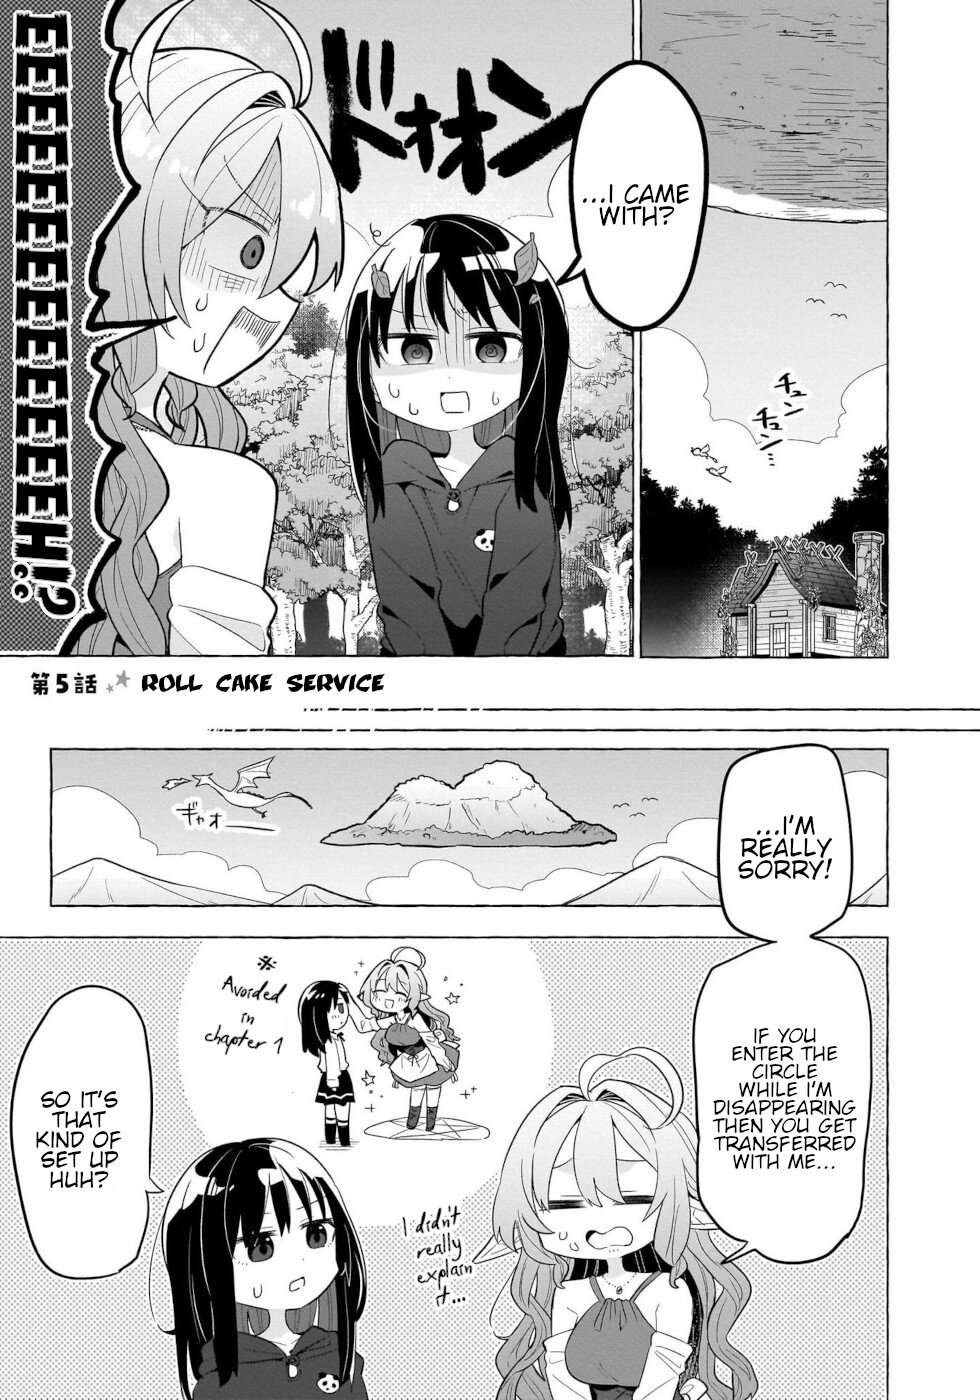 Sweets, Elf, And A High School Girl - chapter 5 - #1